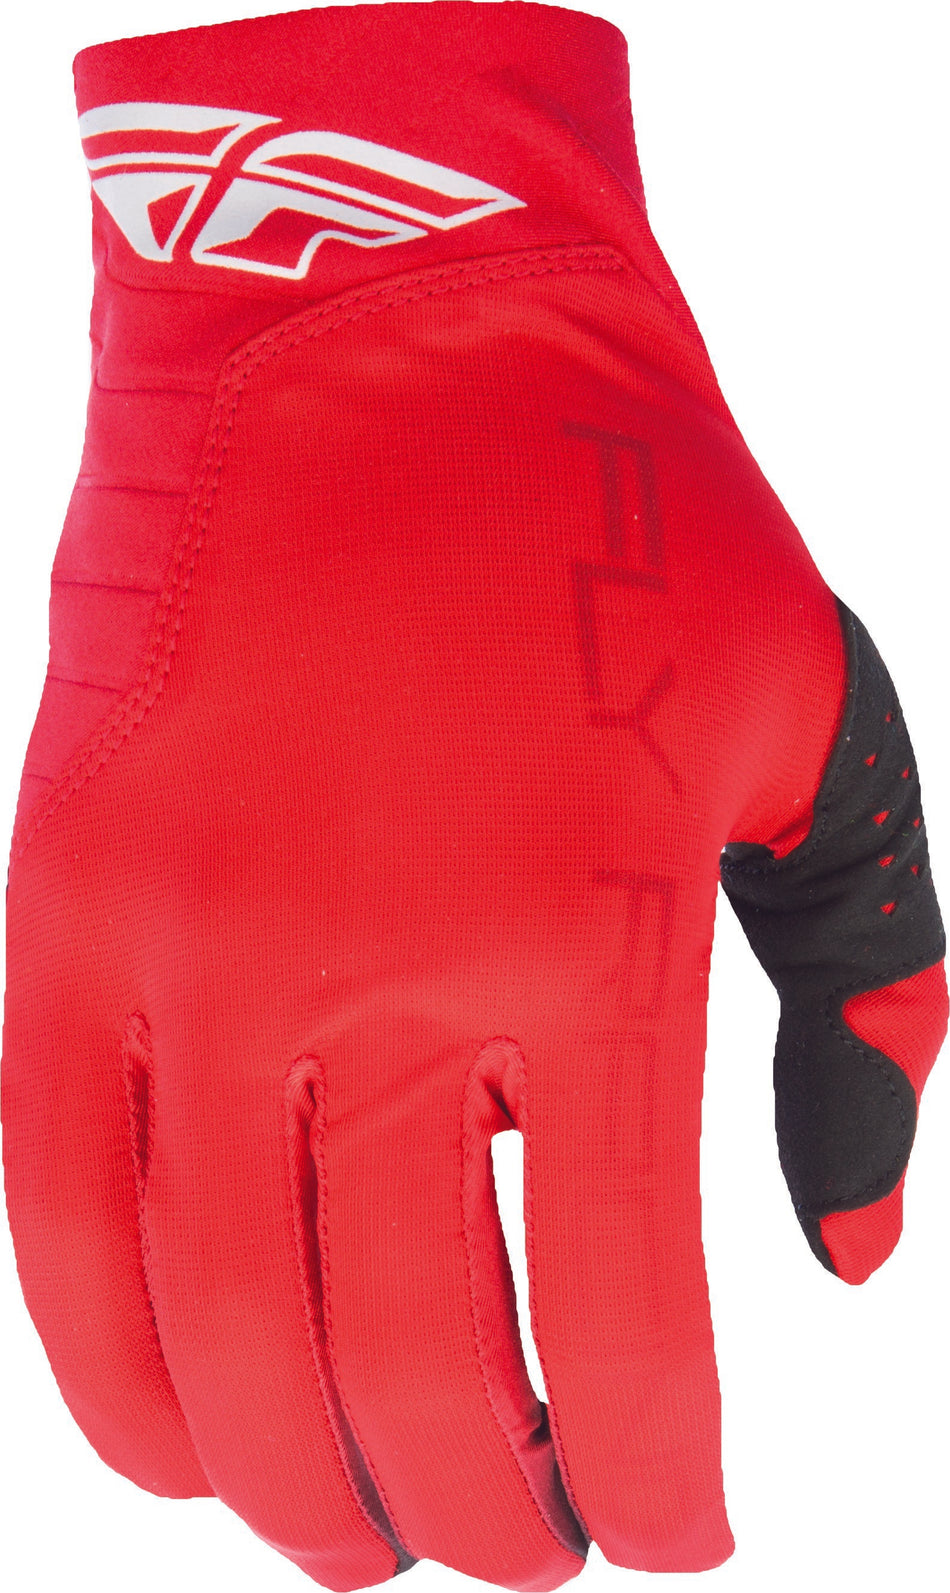 FLY RACING Pro Lite Glove Red Sz 8 S 370-81208